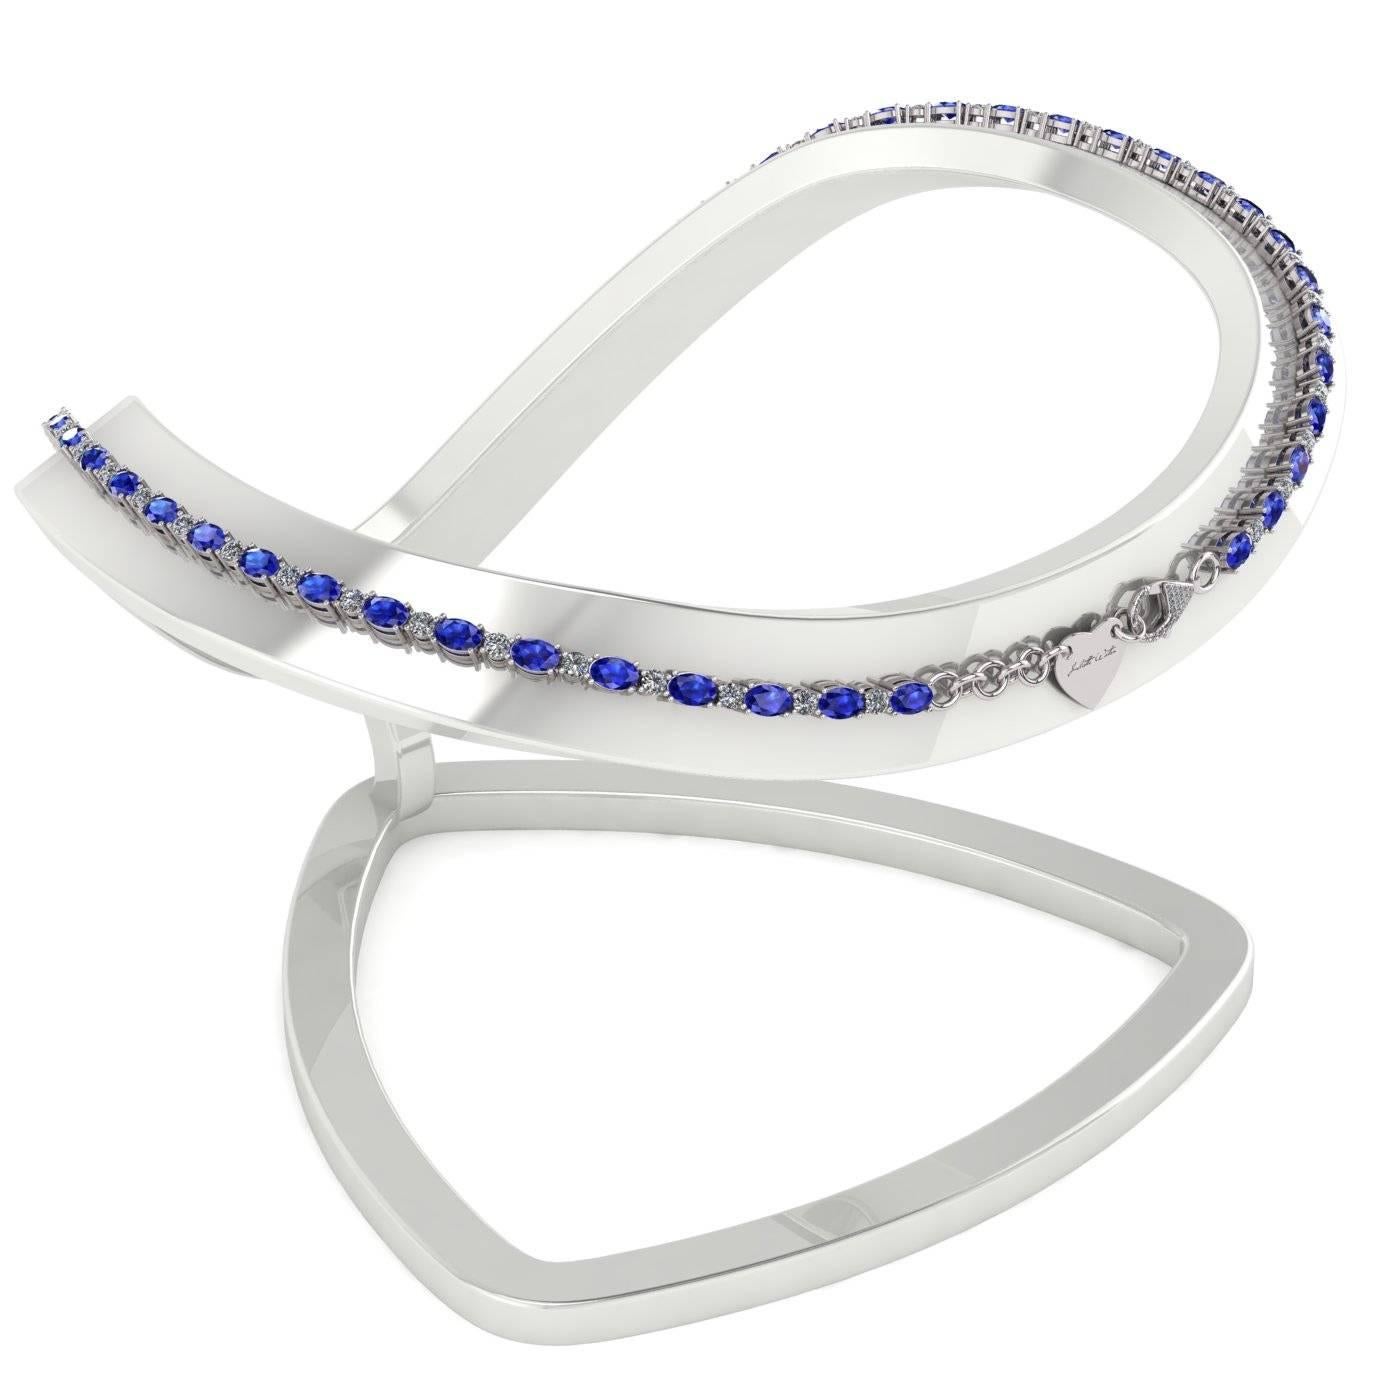 INTRODUCING OUR STUNNING BLUE SAPPHIRE AND DIAMOND TENNIS NECKLACE 

Beautiful and precious! Magnificent and holy blue sapphires. Captivating deep blue color is a color of wisdom and royalty. It is symbolizing power, prophecy and divinity. Discover